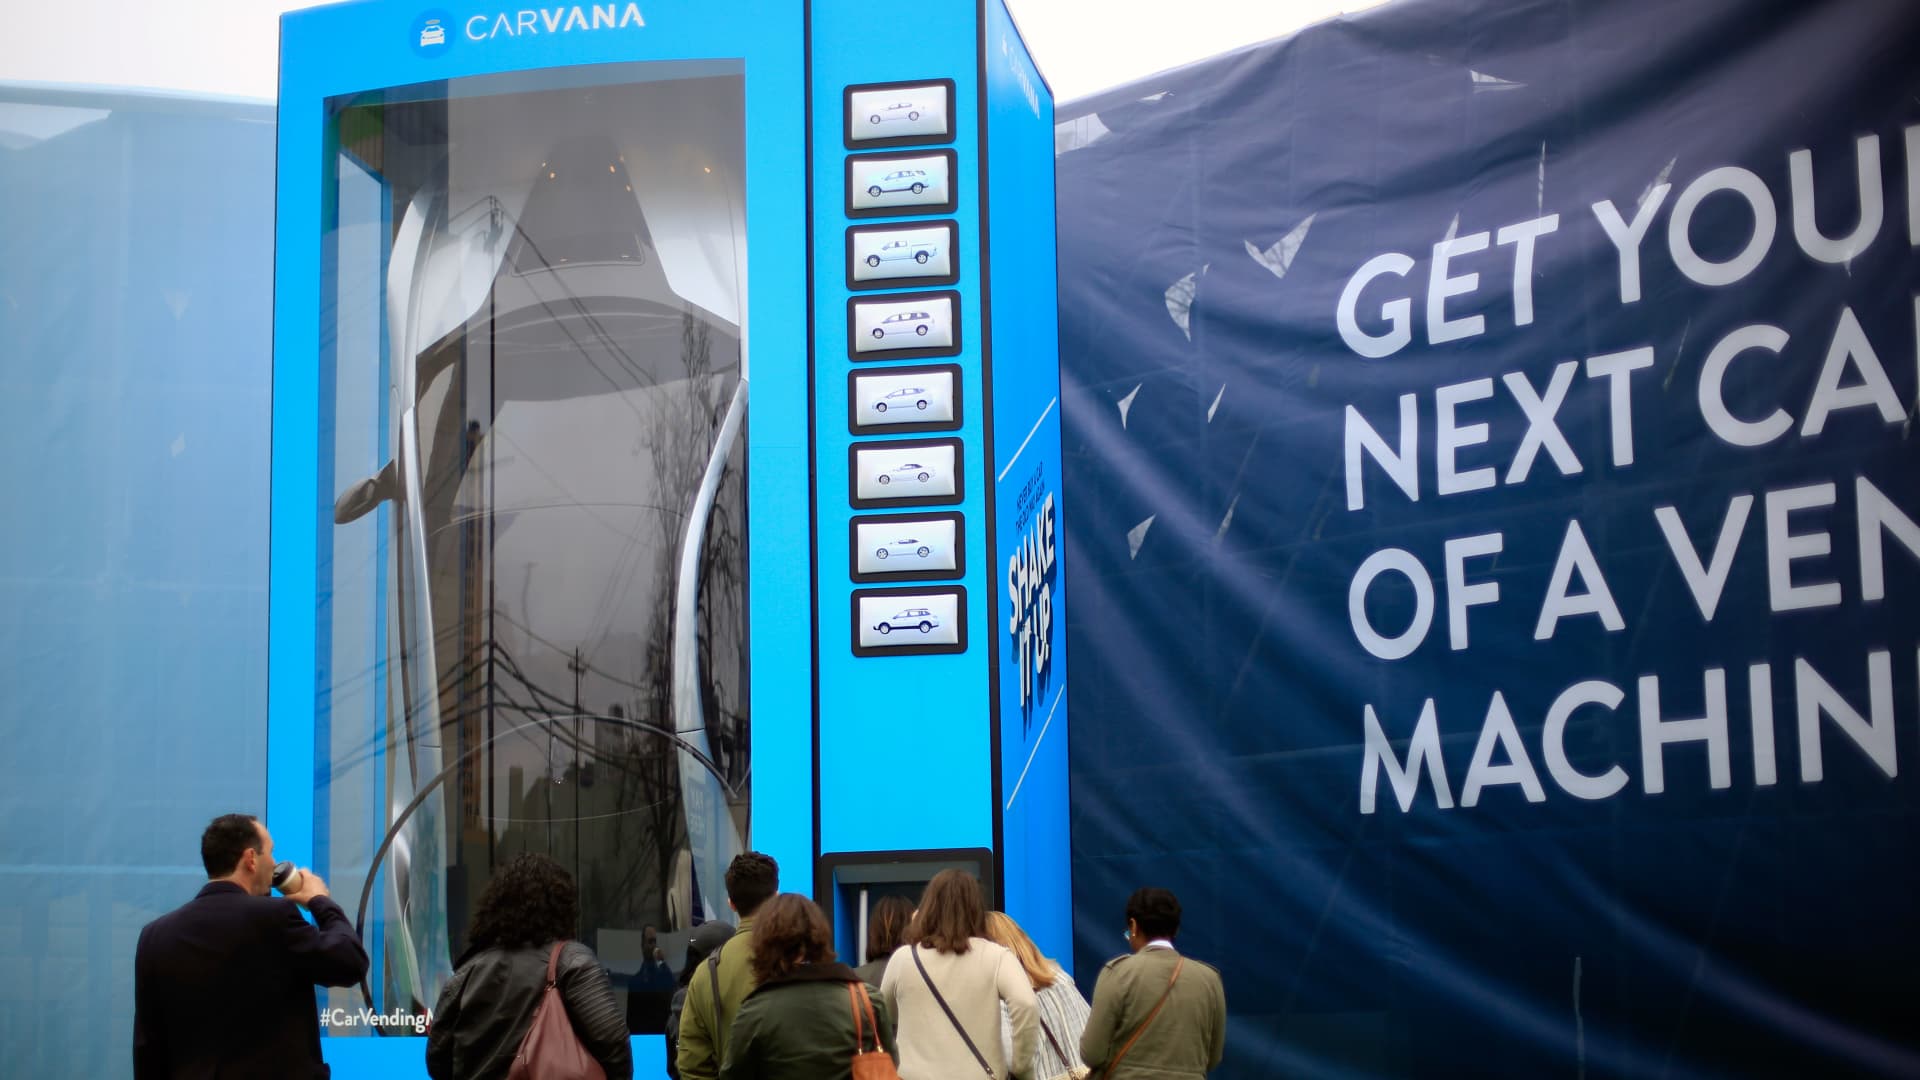 Carvana shares jump more than 30% from record lows